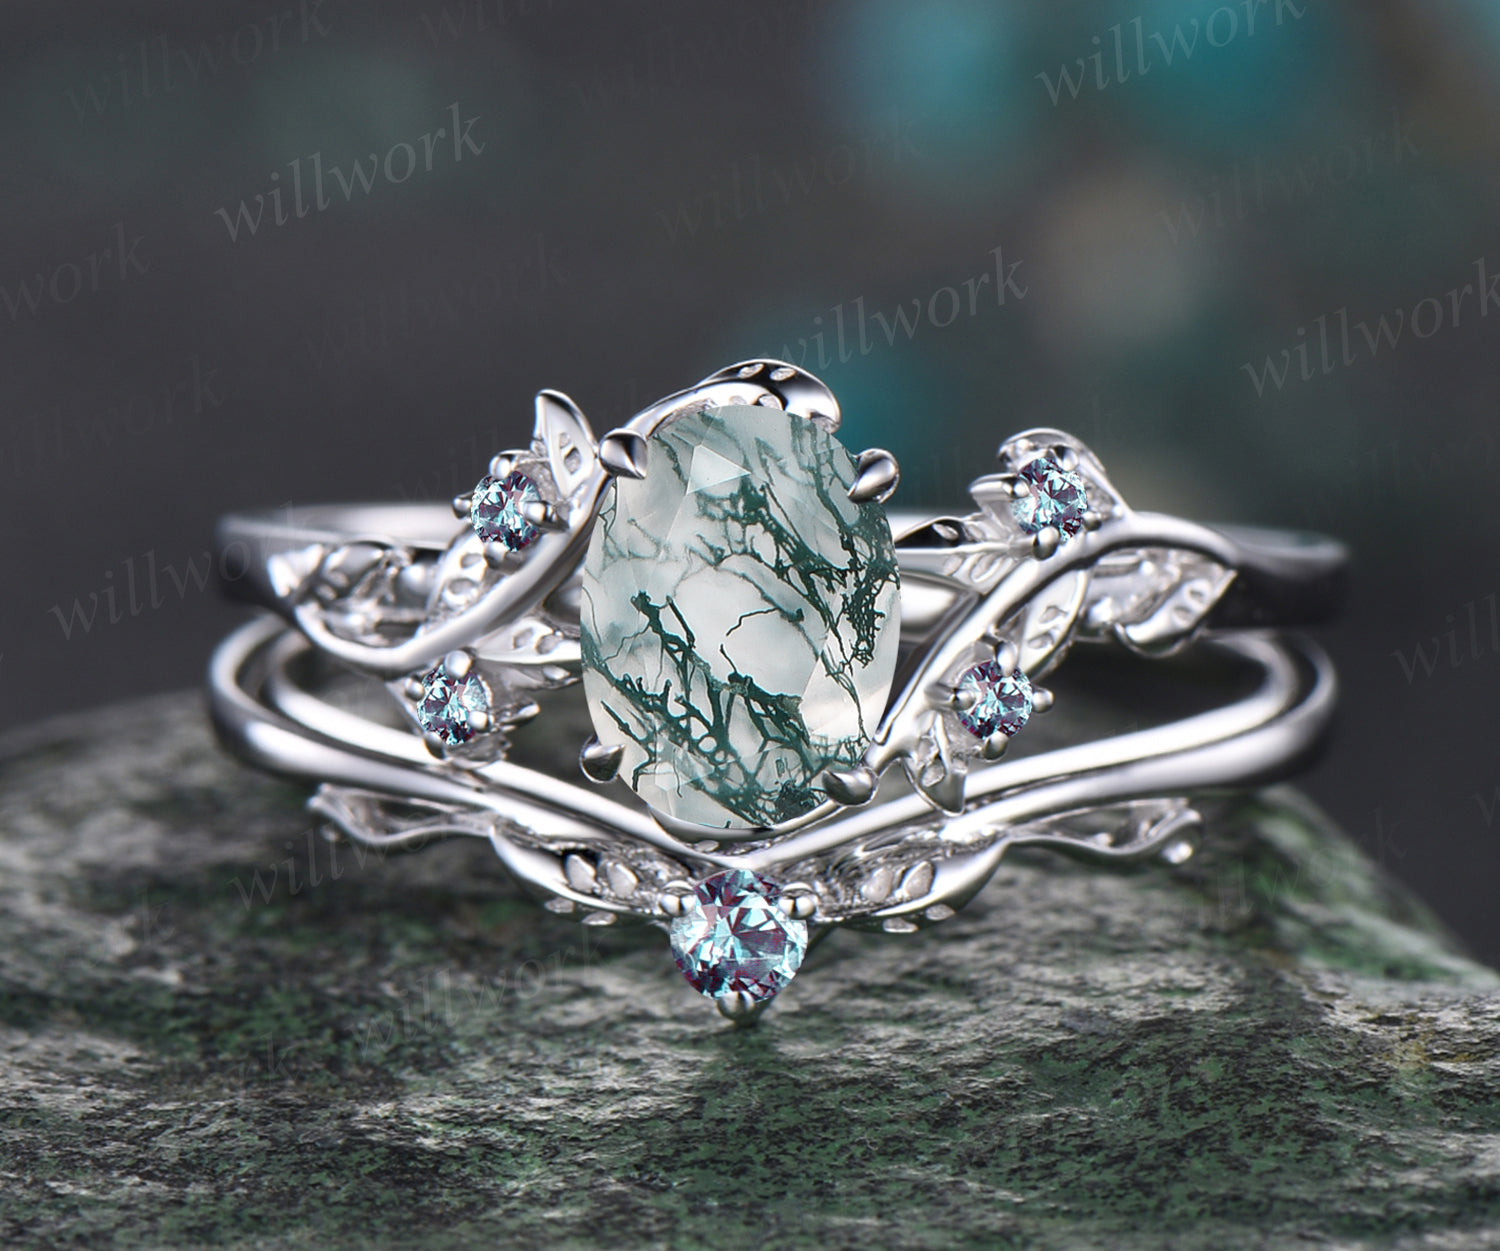 2PCS Moss agate Ring Engagement Ring Birthstone Jewelry Bridal Ring promise  Ring | eBay